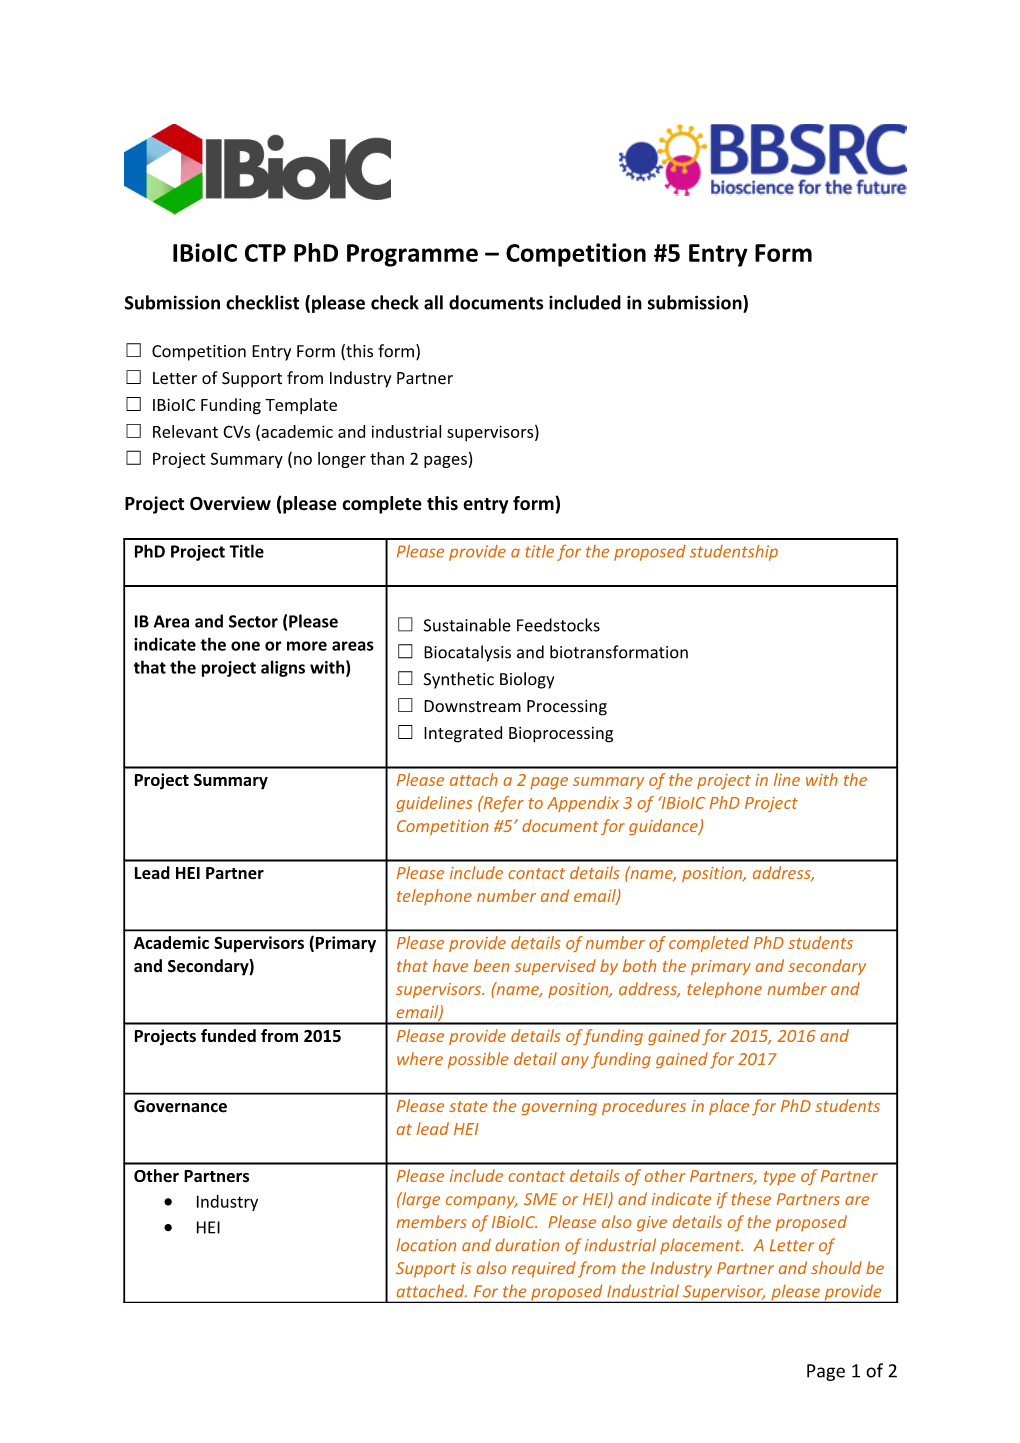 Ibioic CTP Phdprogramme Competition #5 Entry Form